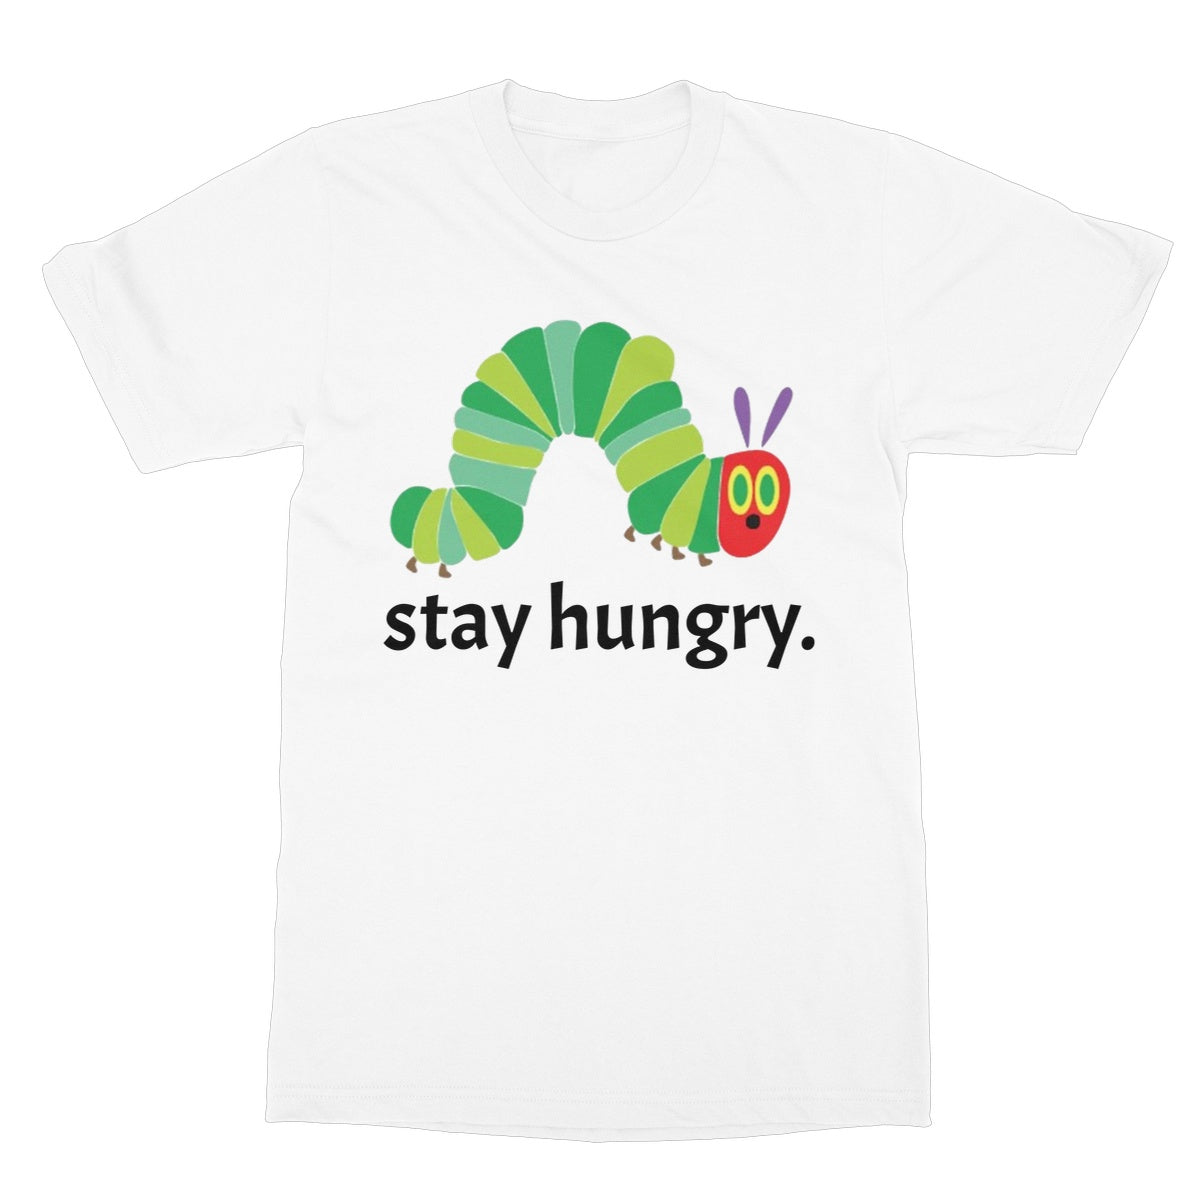 stay hungry t shirt white